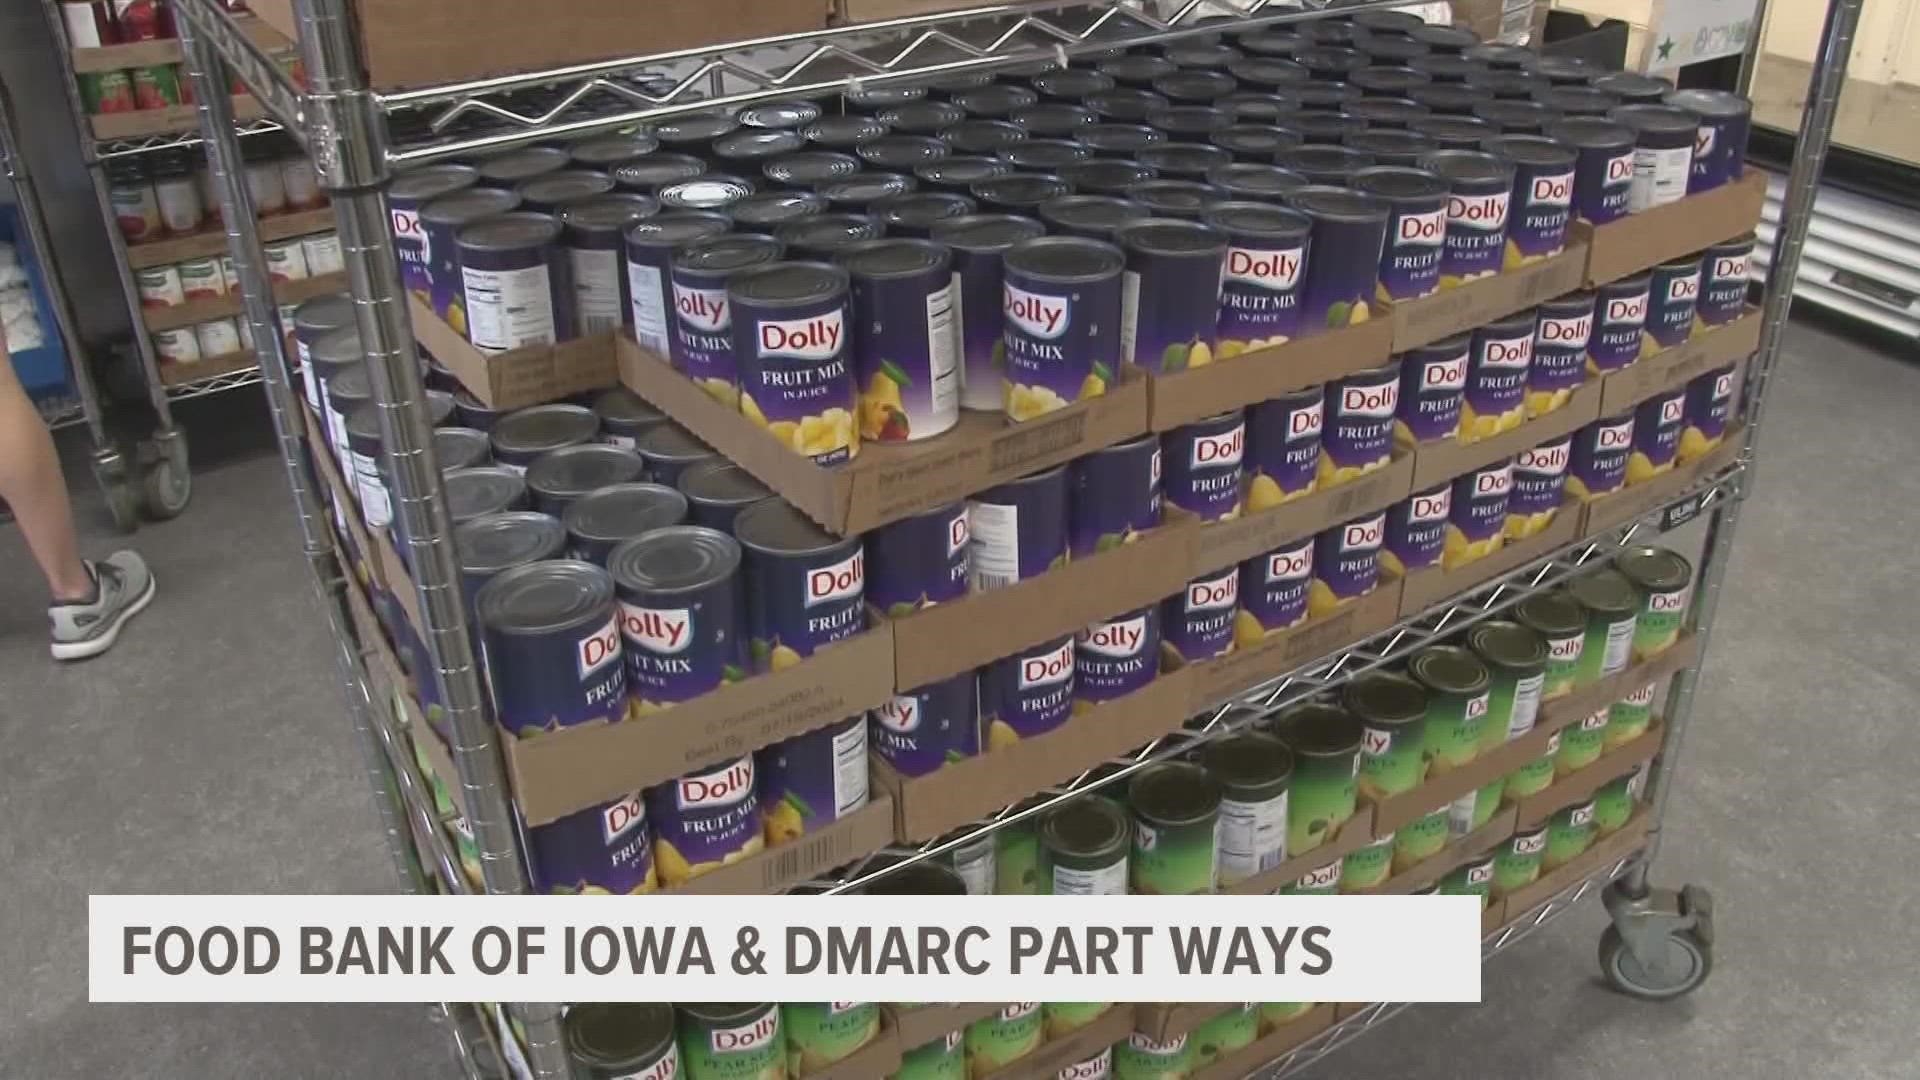 11 DMARC pantries said they are unable to meet the Food Bank's new demands.